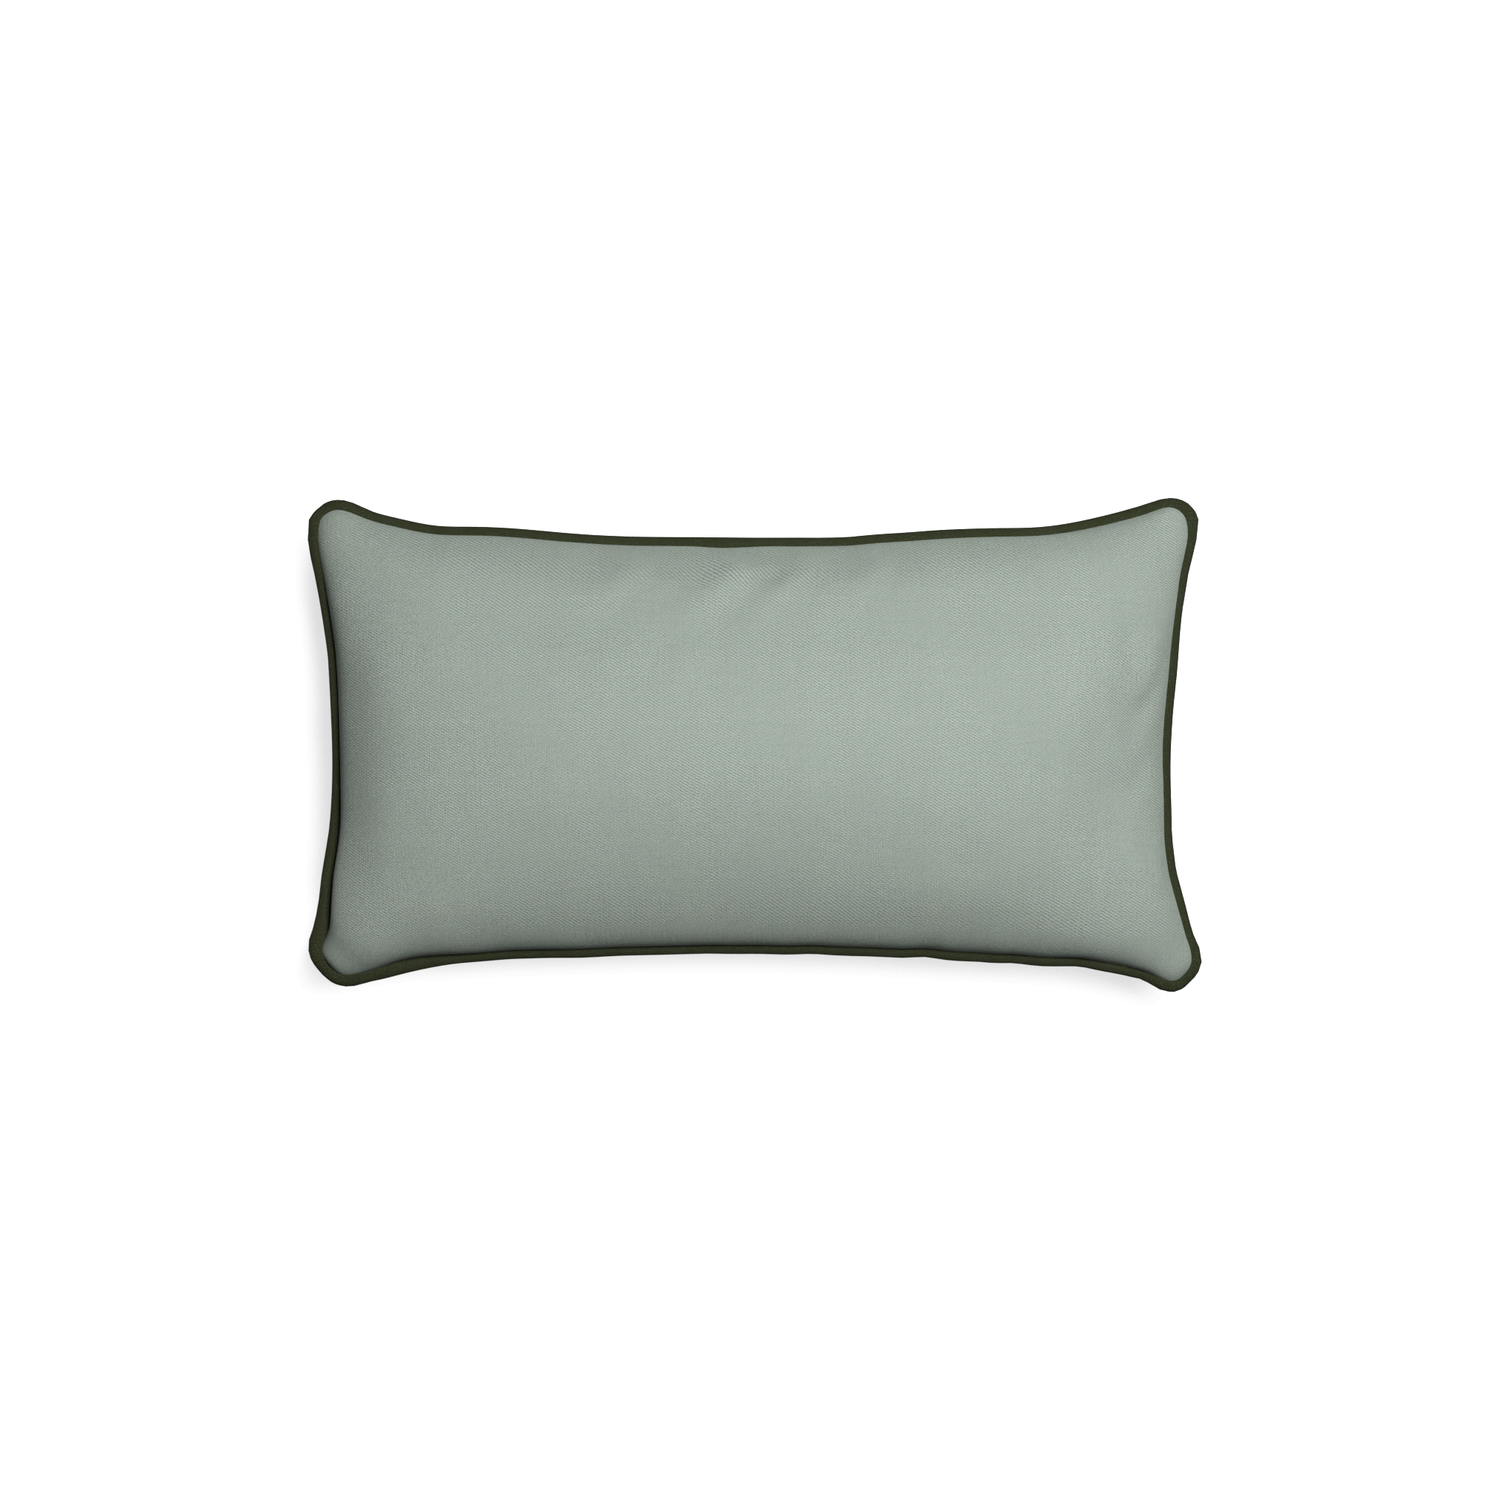 Petite-lumbar sage custom sage green cottonpillow with f piping on white background